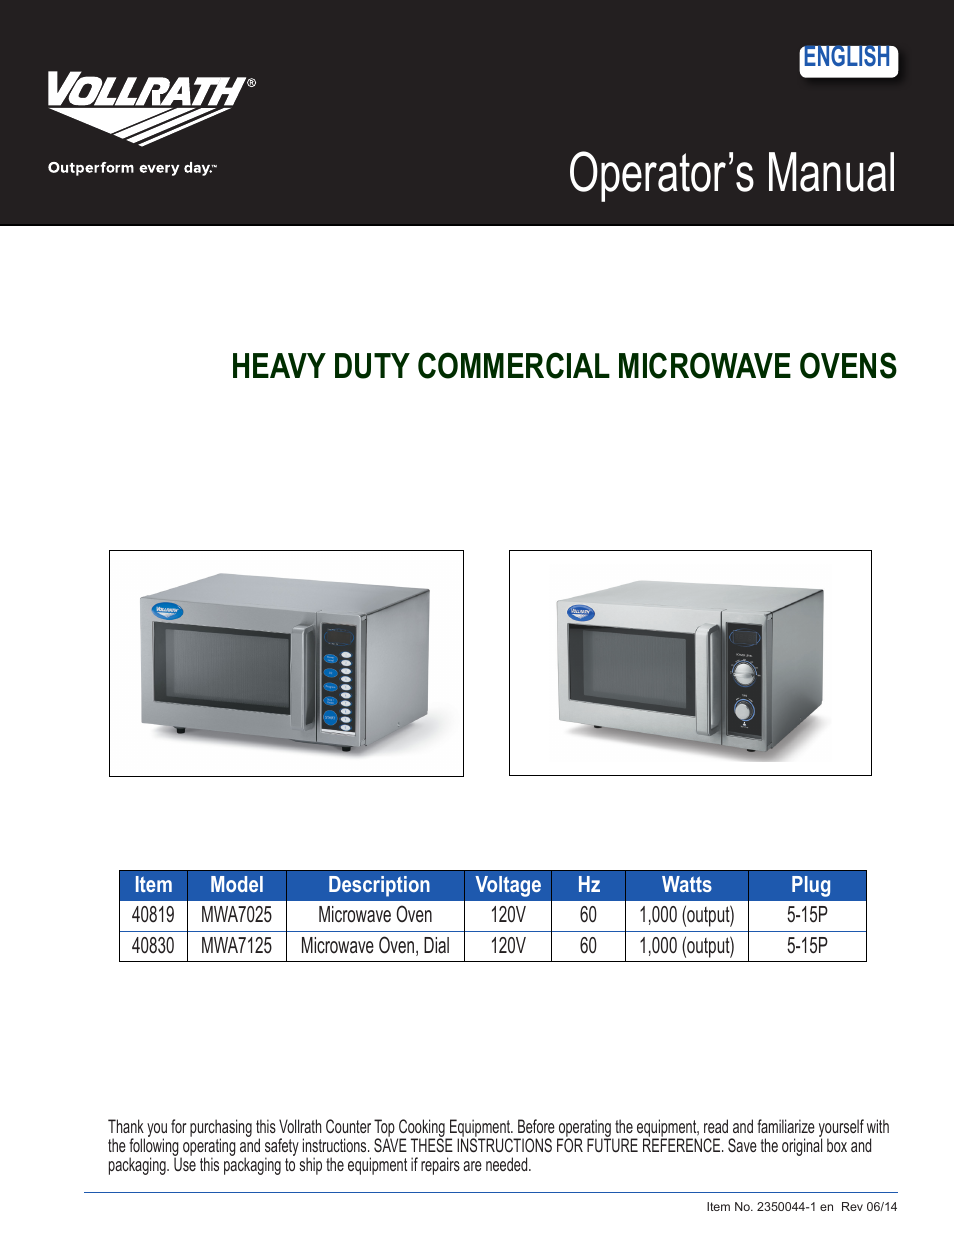 Microwave Oven - Manual